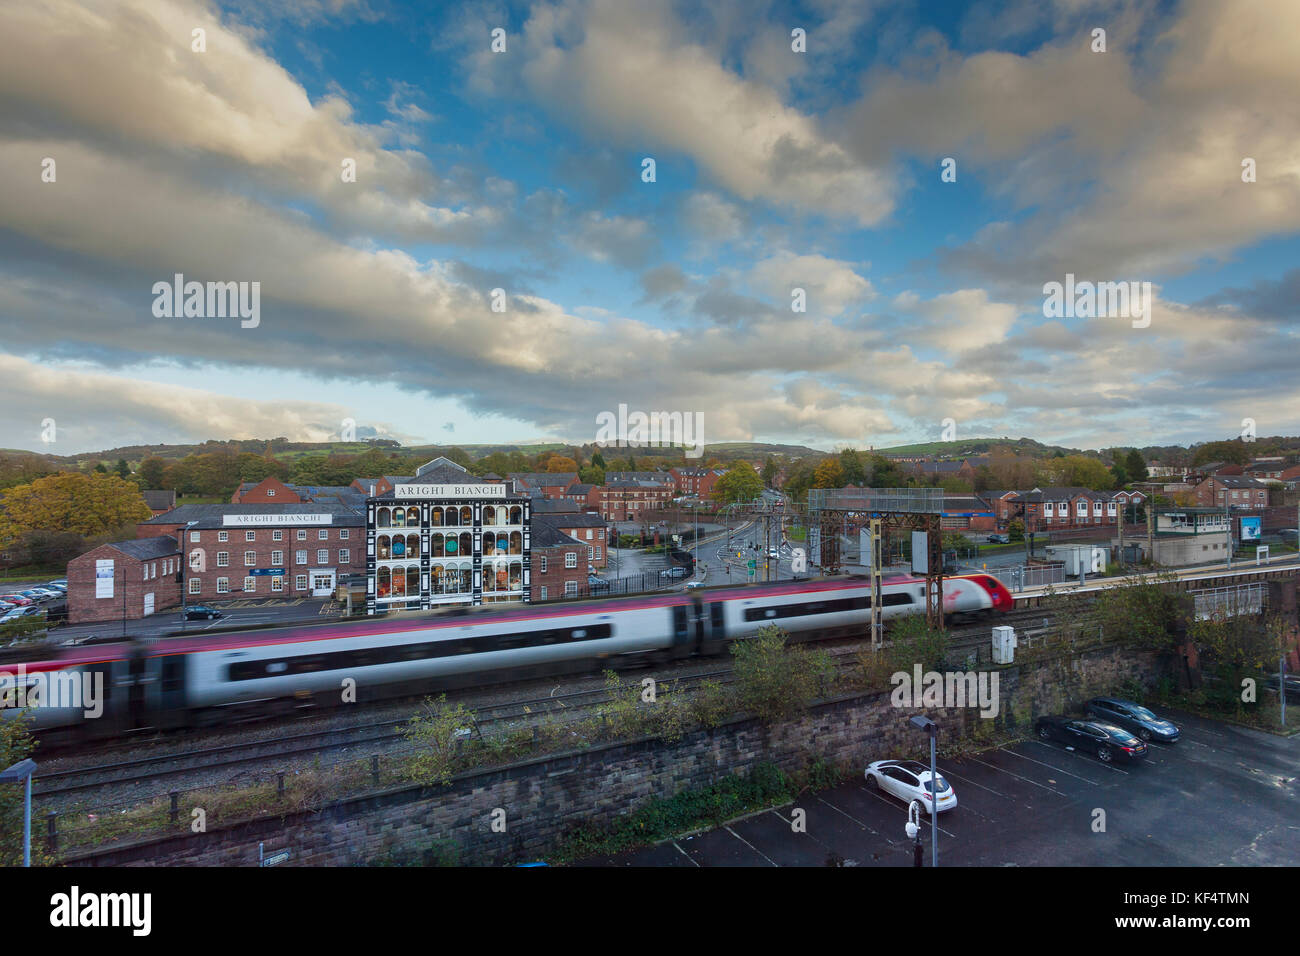 A Virgin Trains Pendolino Train Arriving in to Macclesfield Railway Station Stock Photo